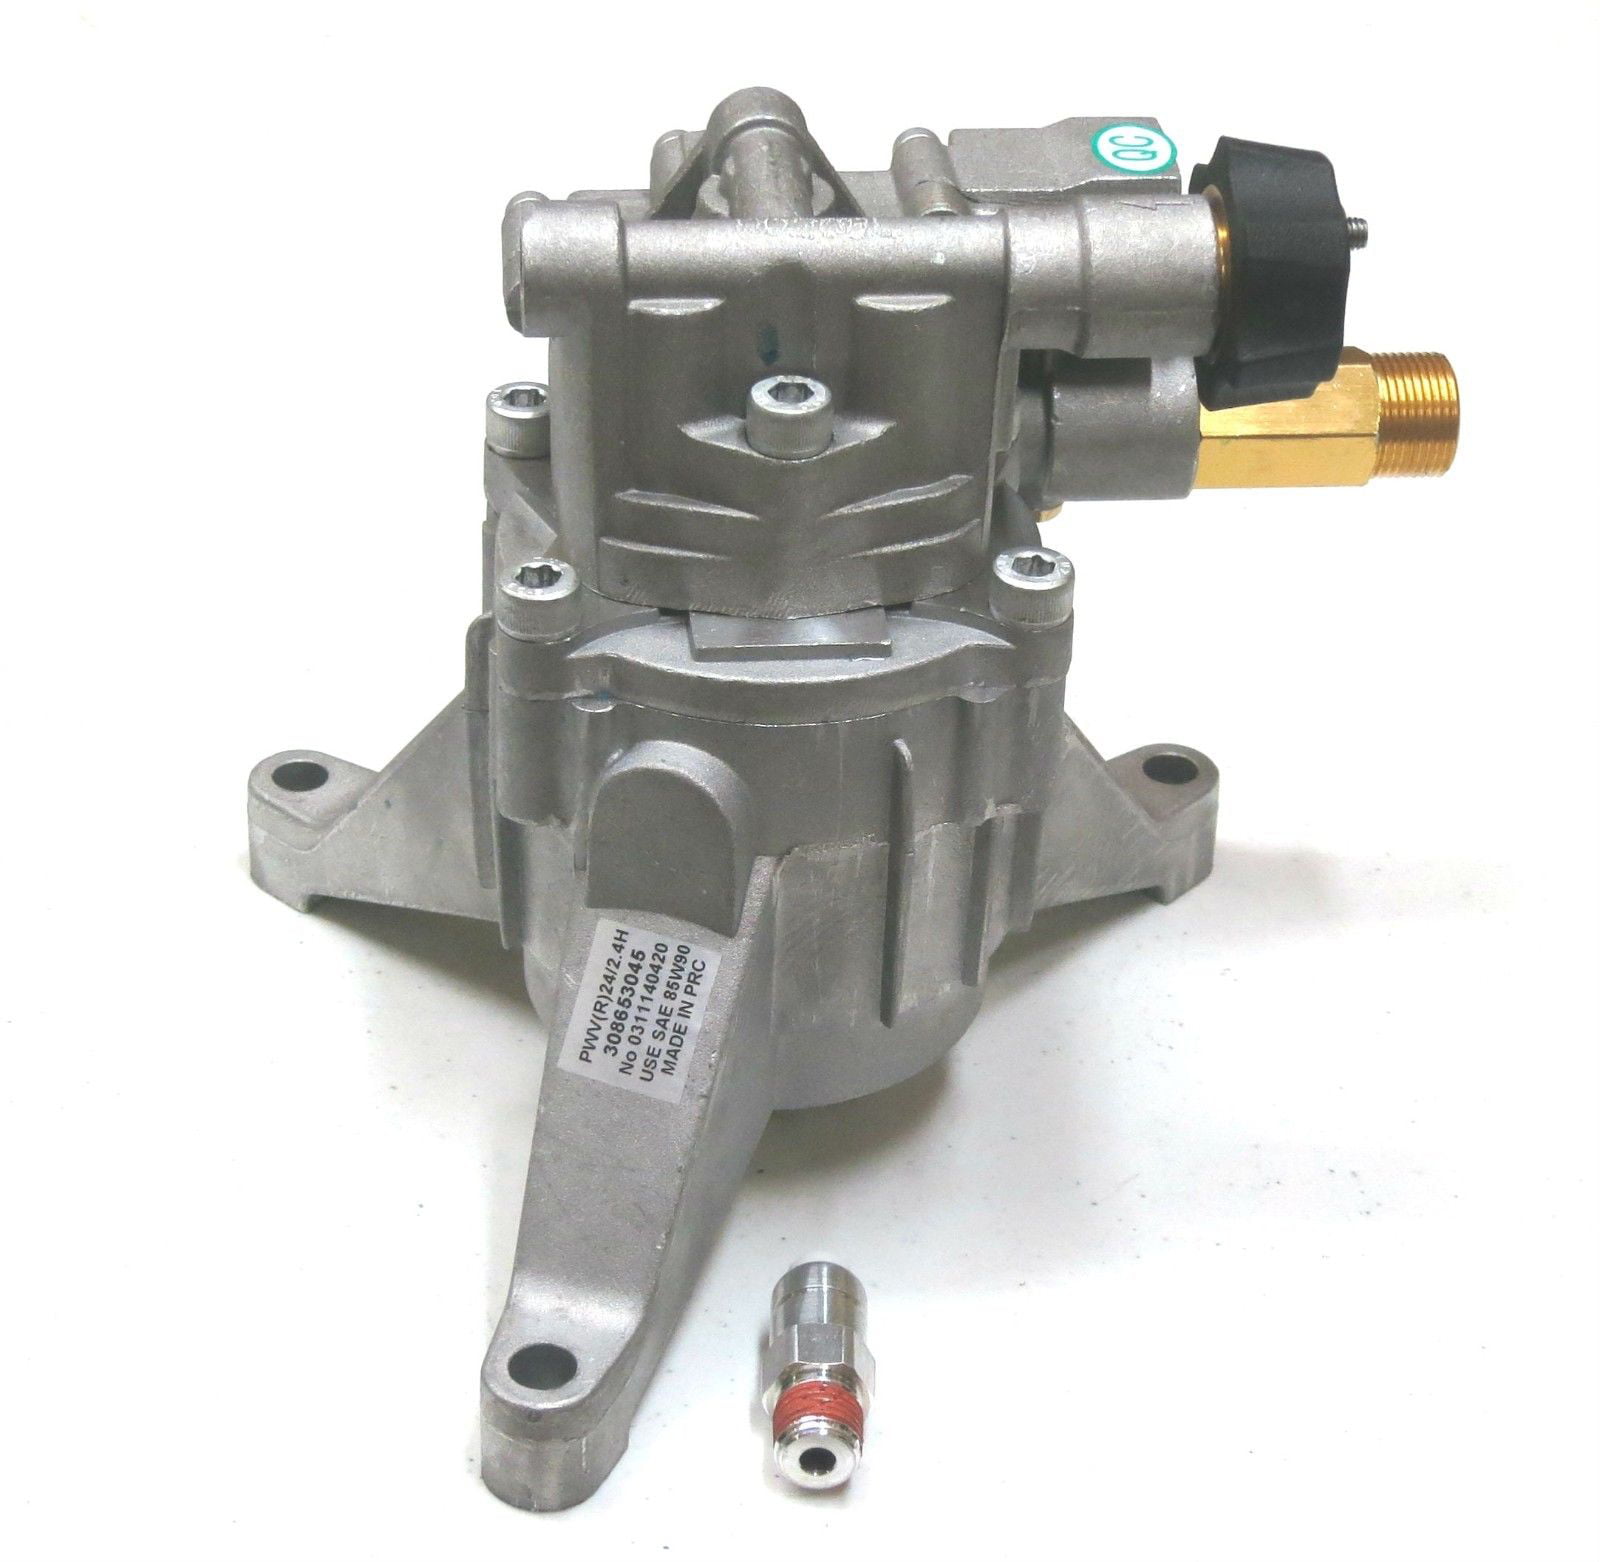 New 2800 psi POWER PRESSURE WASHER WATER PUMP Troy-Bilt 020486 020486-0 by The ROP Shop